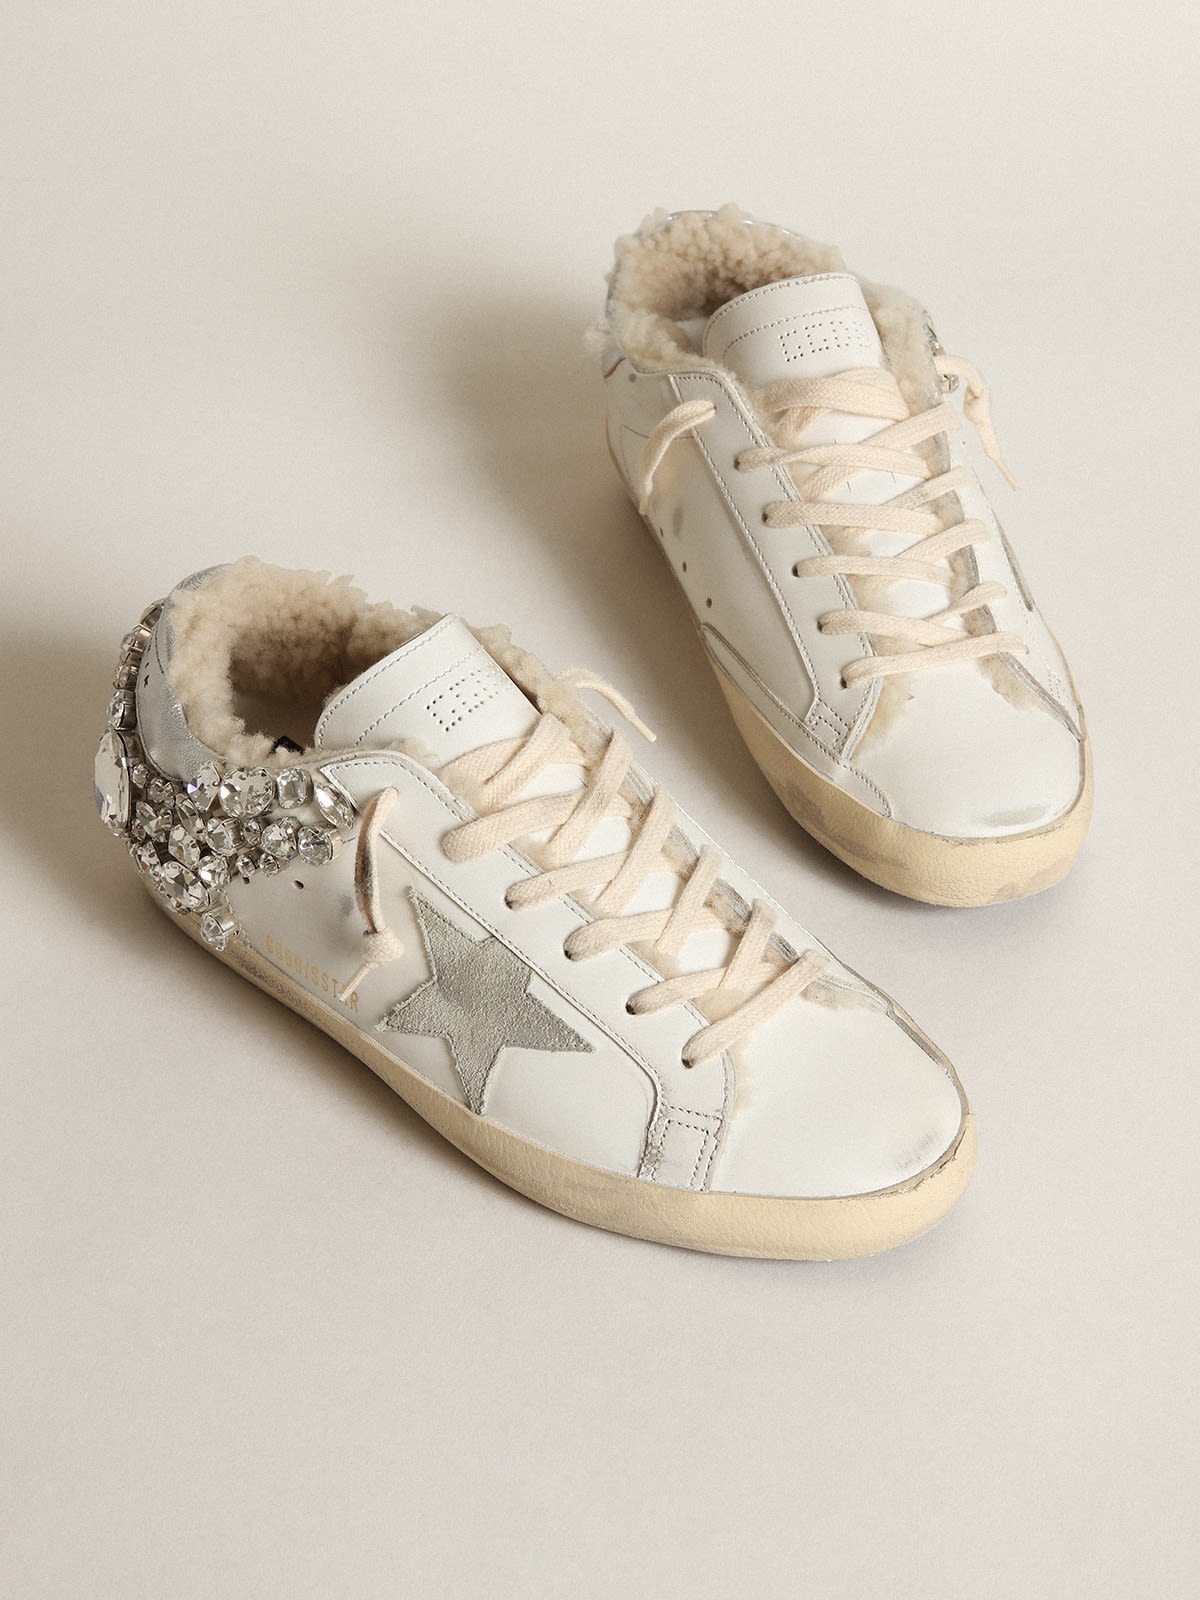 Super-Star sneakers with shearling lining and decorative crystals - 2